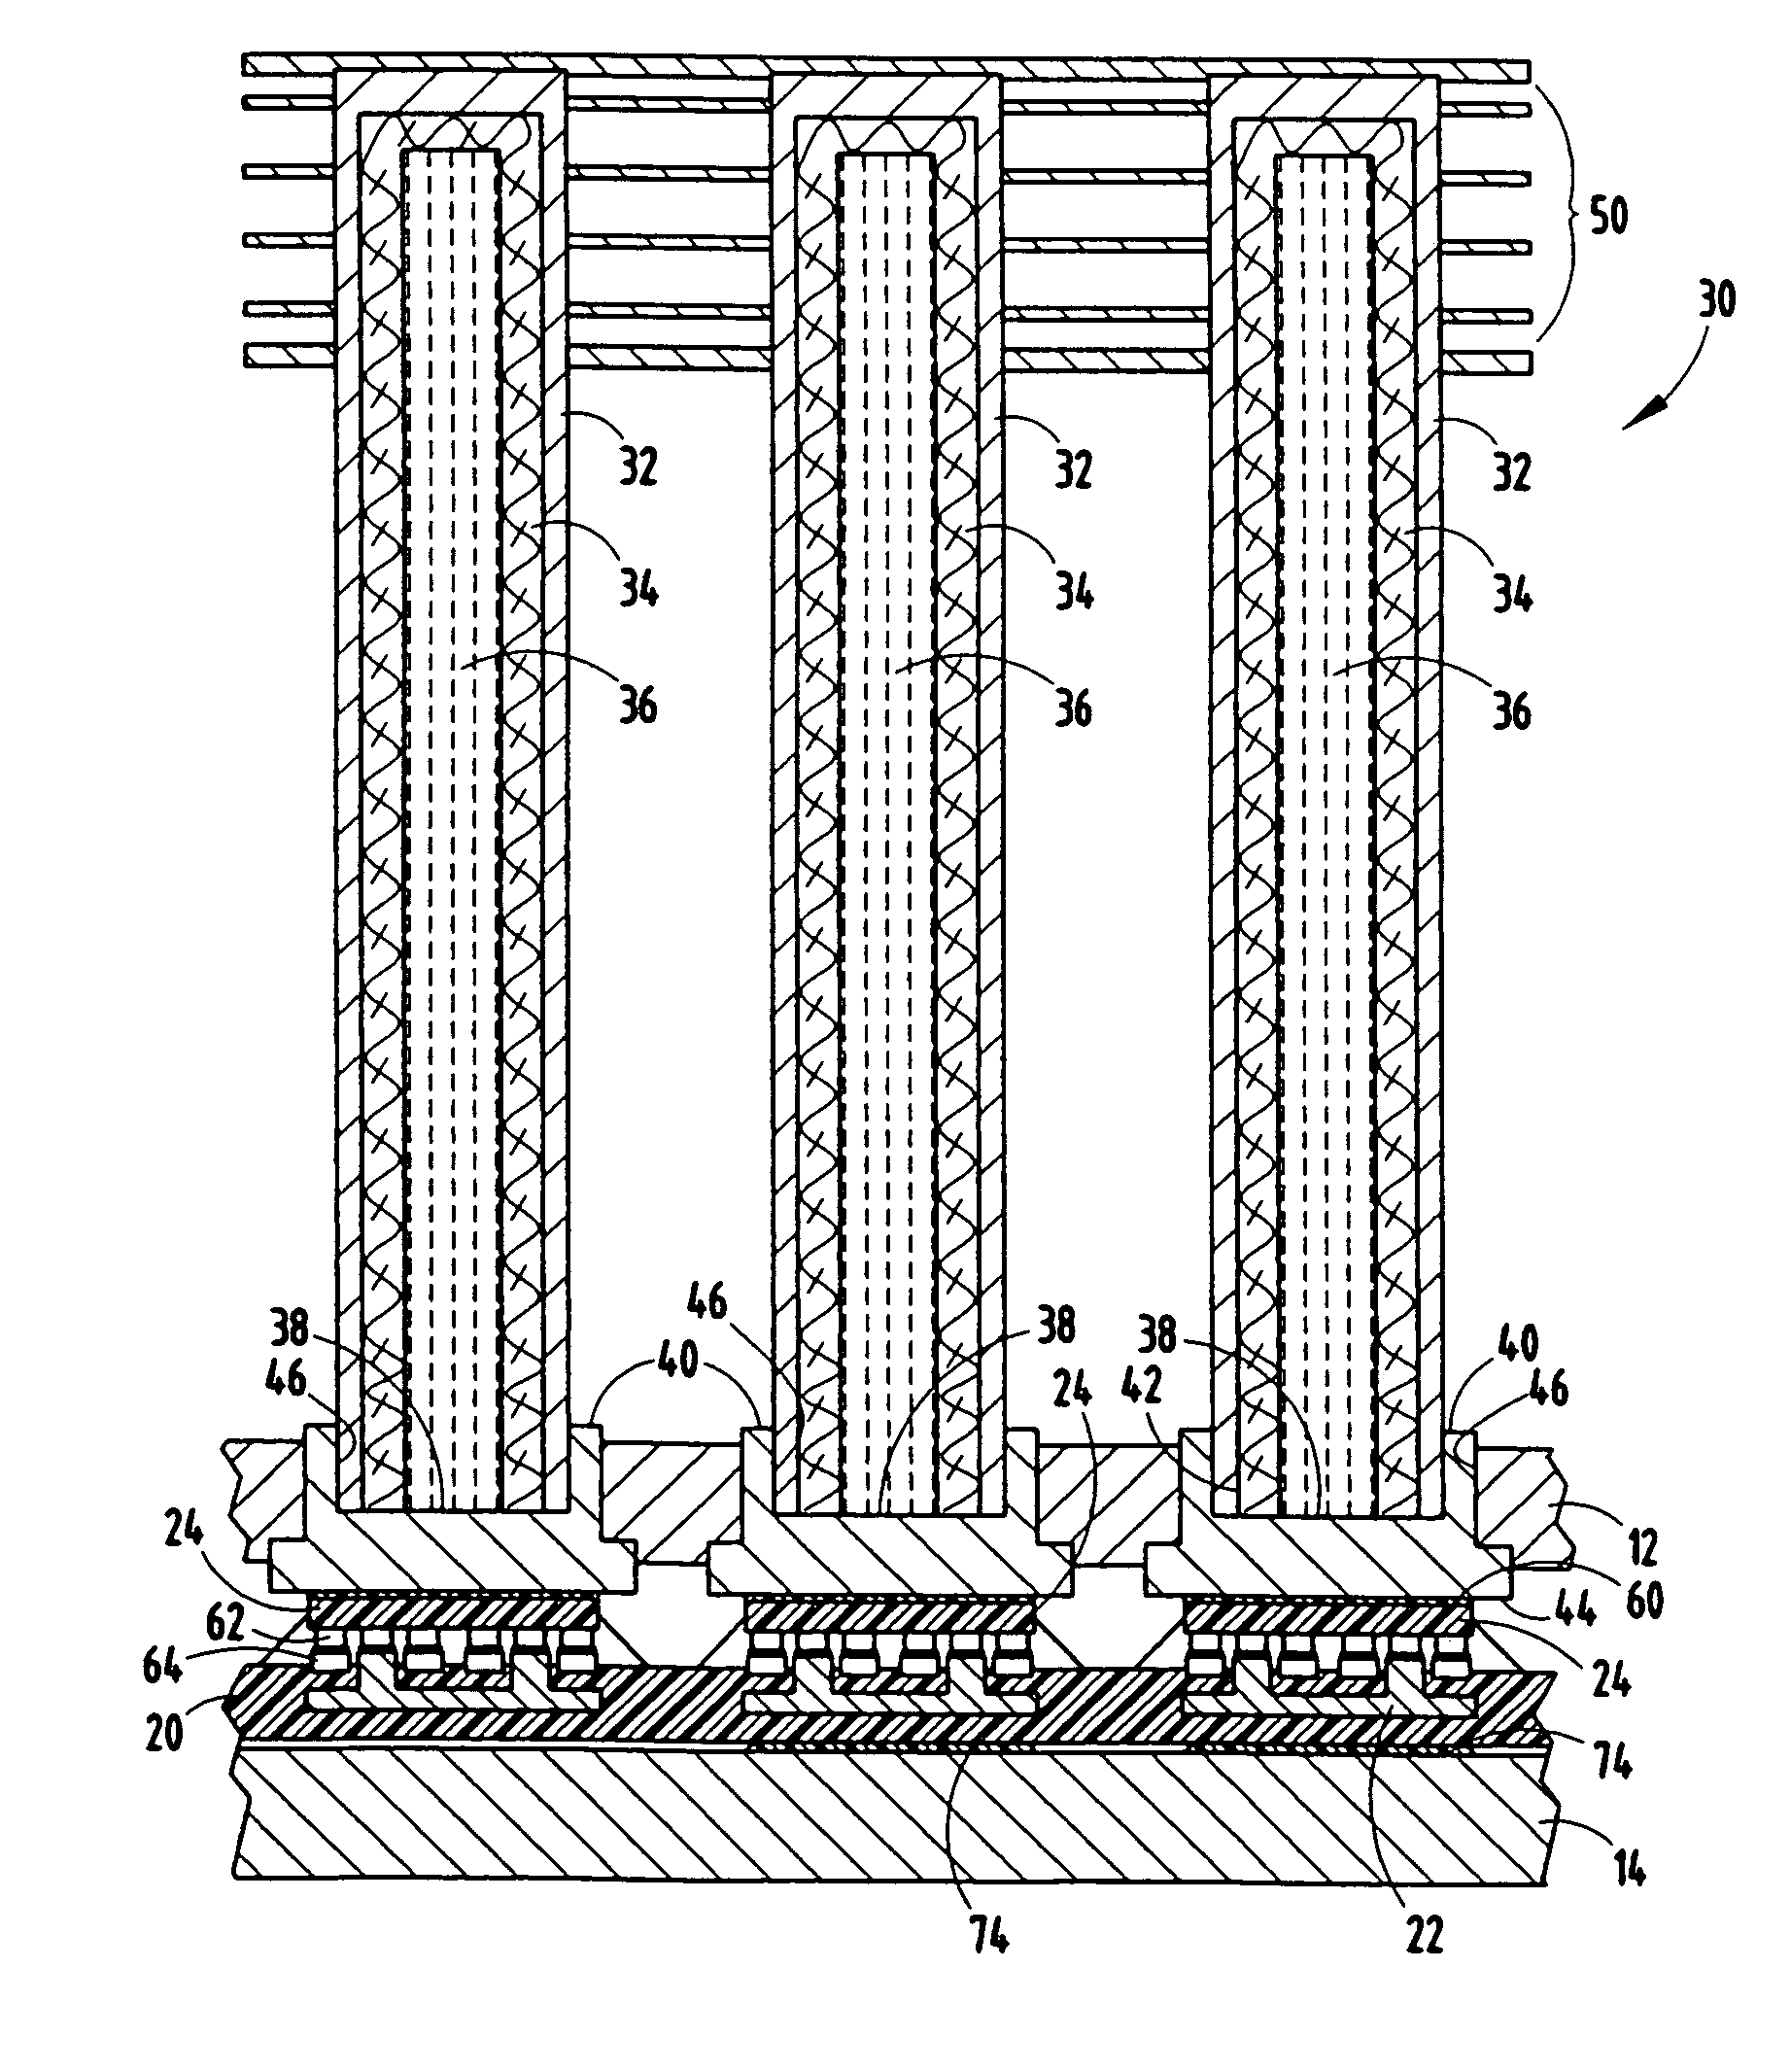 Electronics assembly and heat pipe device